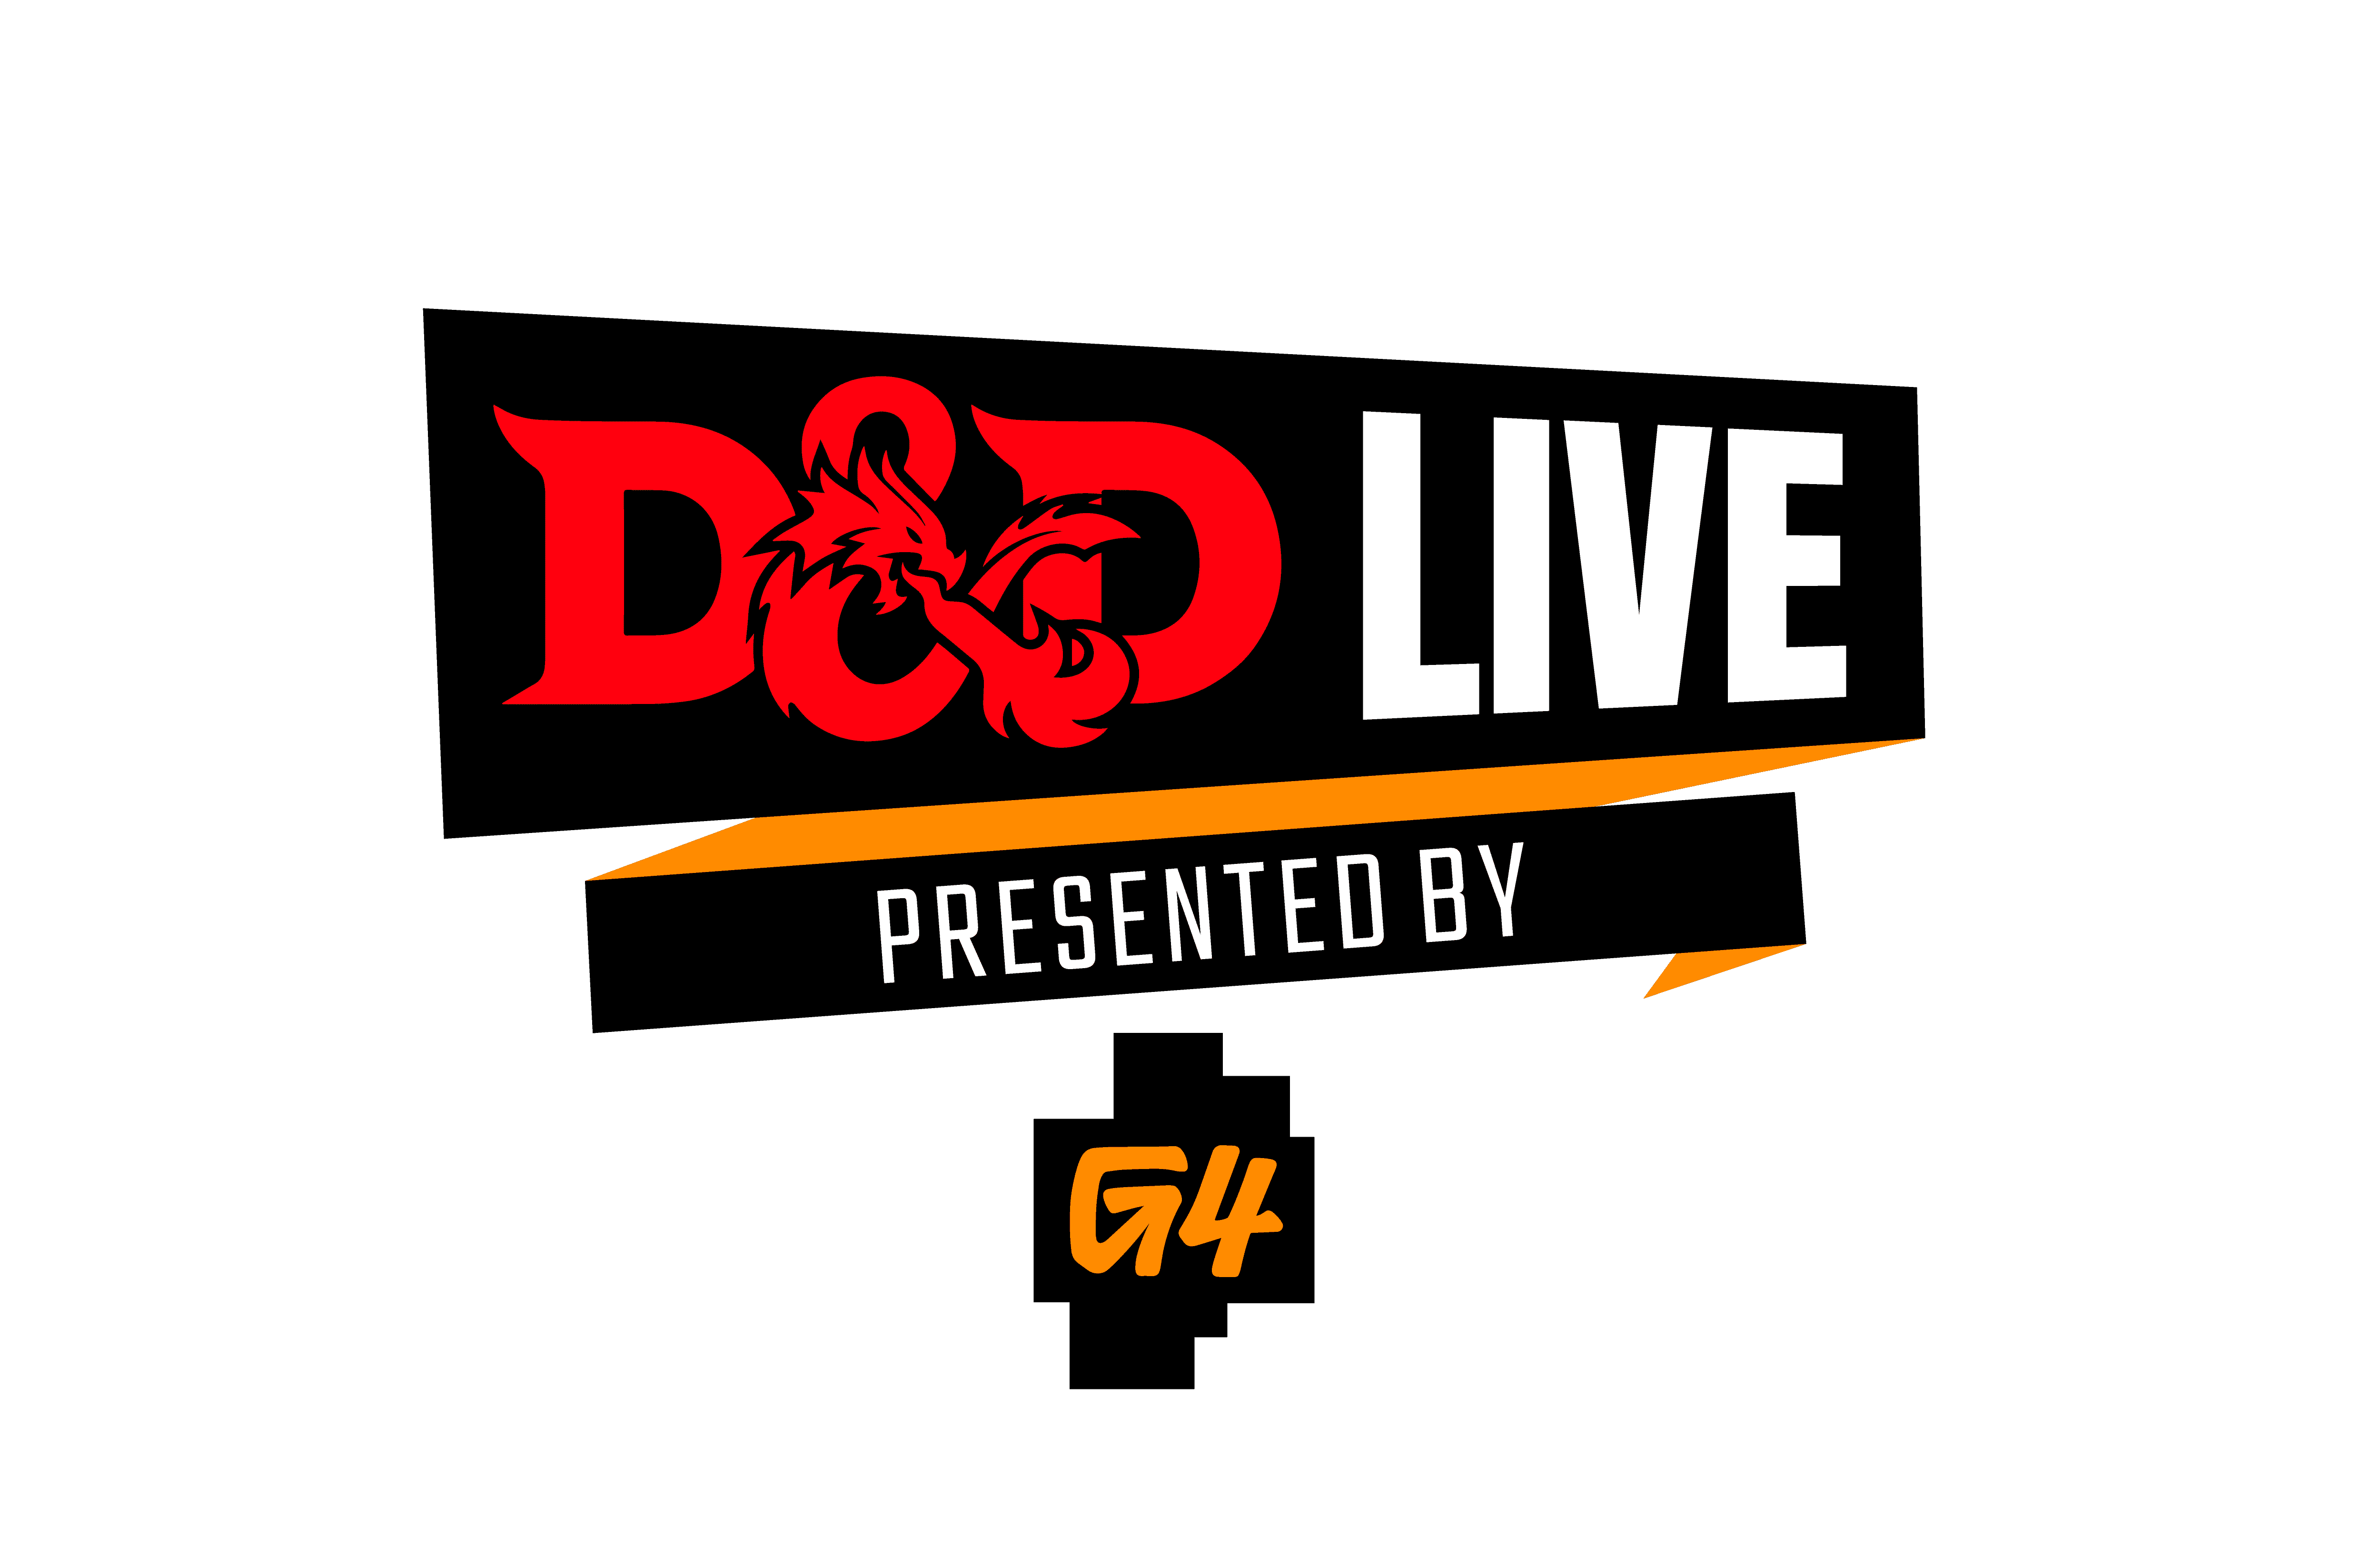 Geek insider, geekinsider, geekinsider. Com,, g4 and wizards of the coast partner for d&d live 2021, gaming